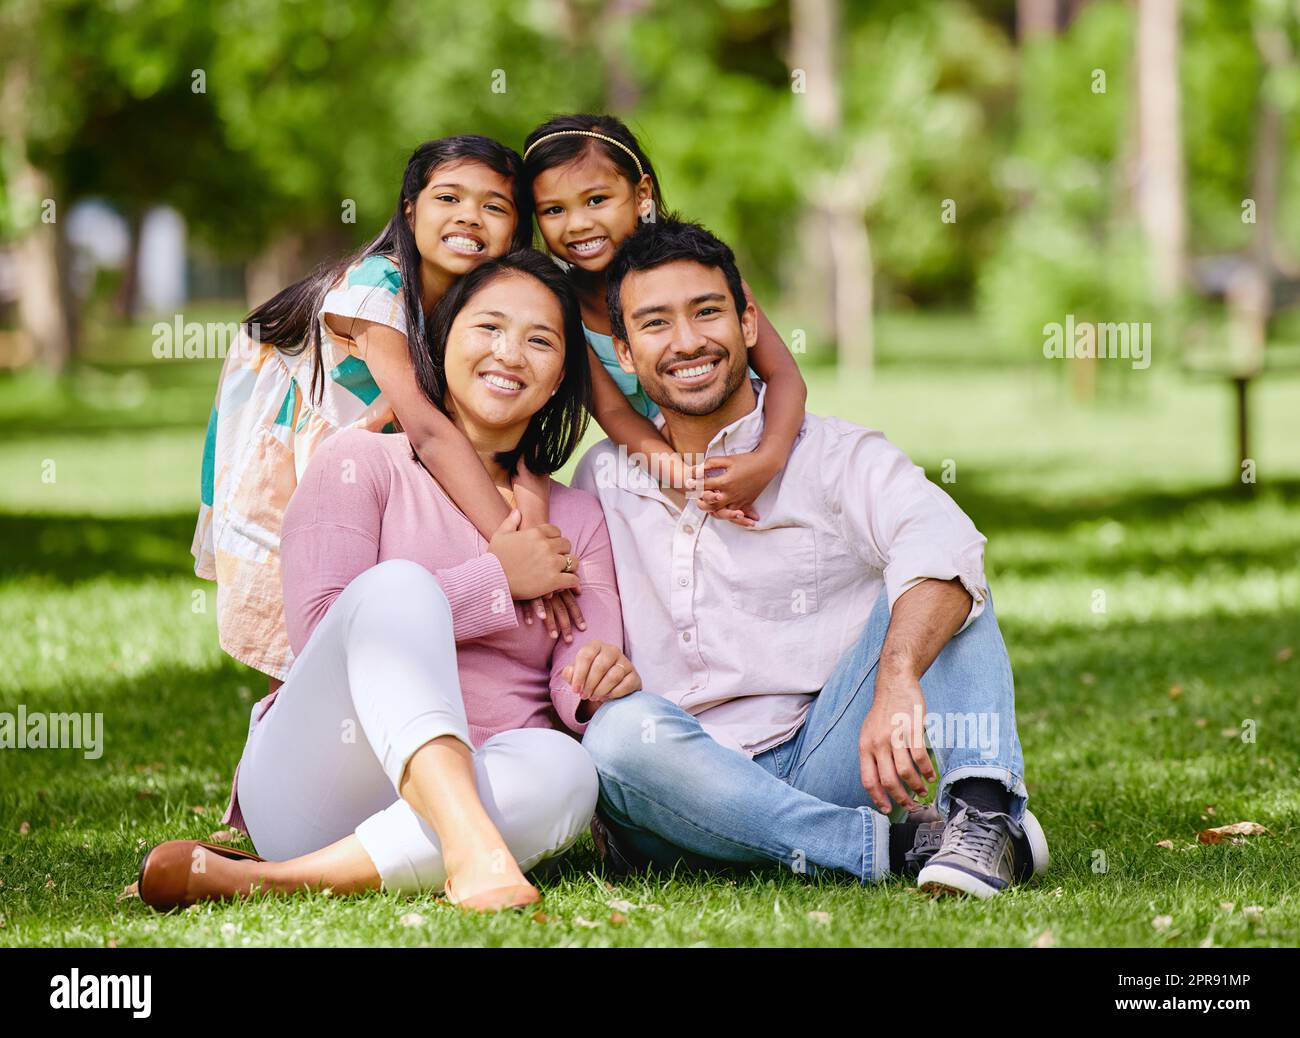 Portrait of happy asian family in the park. Adorable little girls bonding and hugging their parents outside in a park. Full length husband and wife sitting and enjoying free time with their daughters Stock Photo